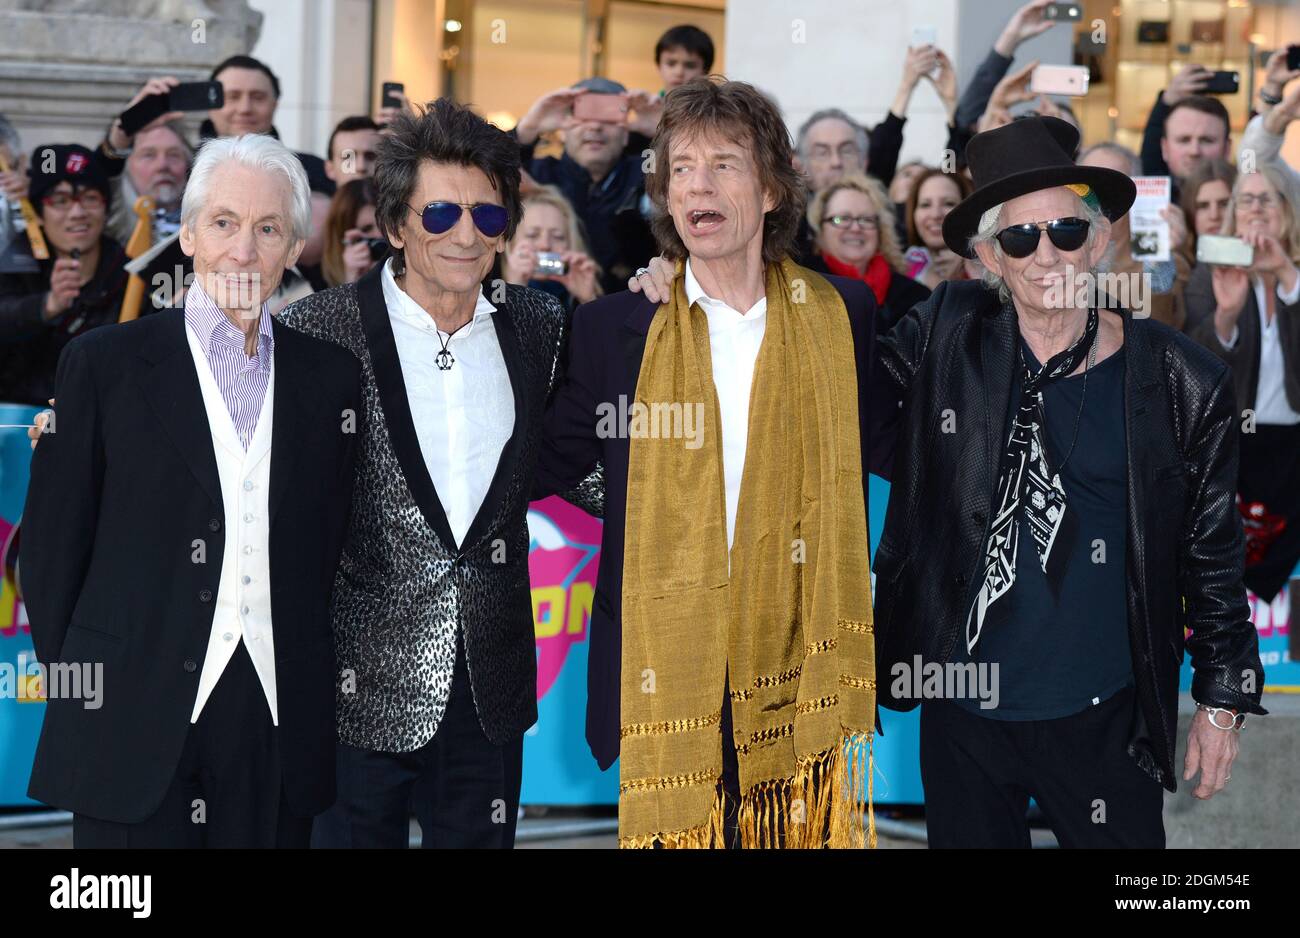 Mick Jagger, Keith Richards, Ronnie Wood and Charlie Watts of the Rolling Stones arriving at the Exhibitionism, The Rolling Stones Exhibition Opening Night Gala at Saatchi Gallery, London.  Stock Photo